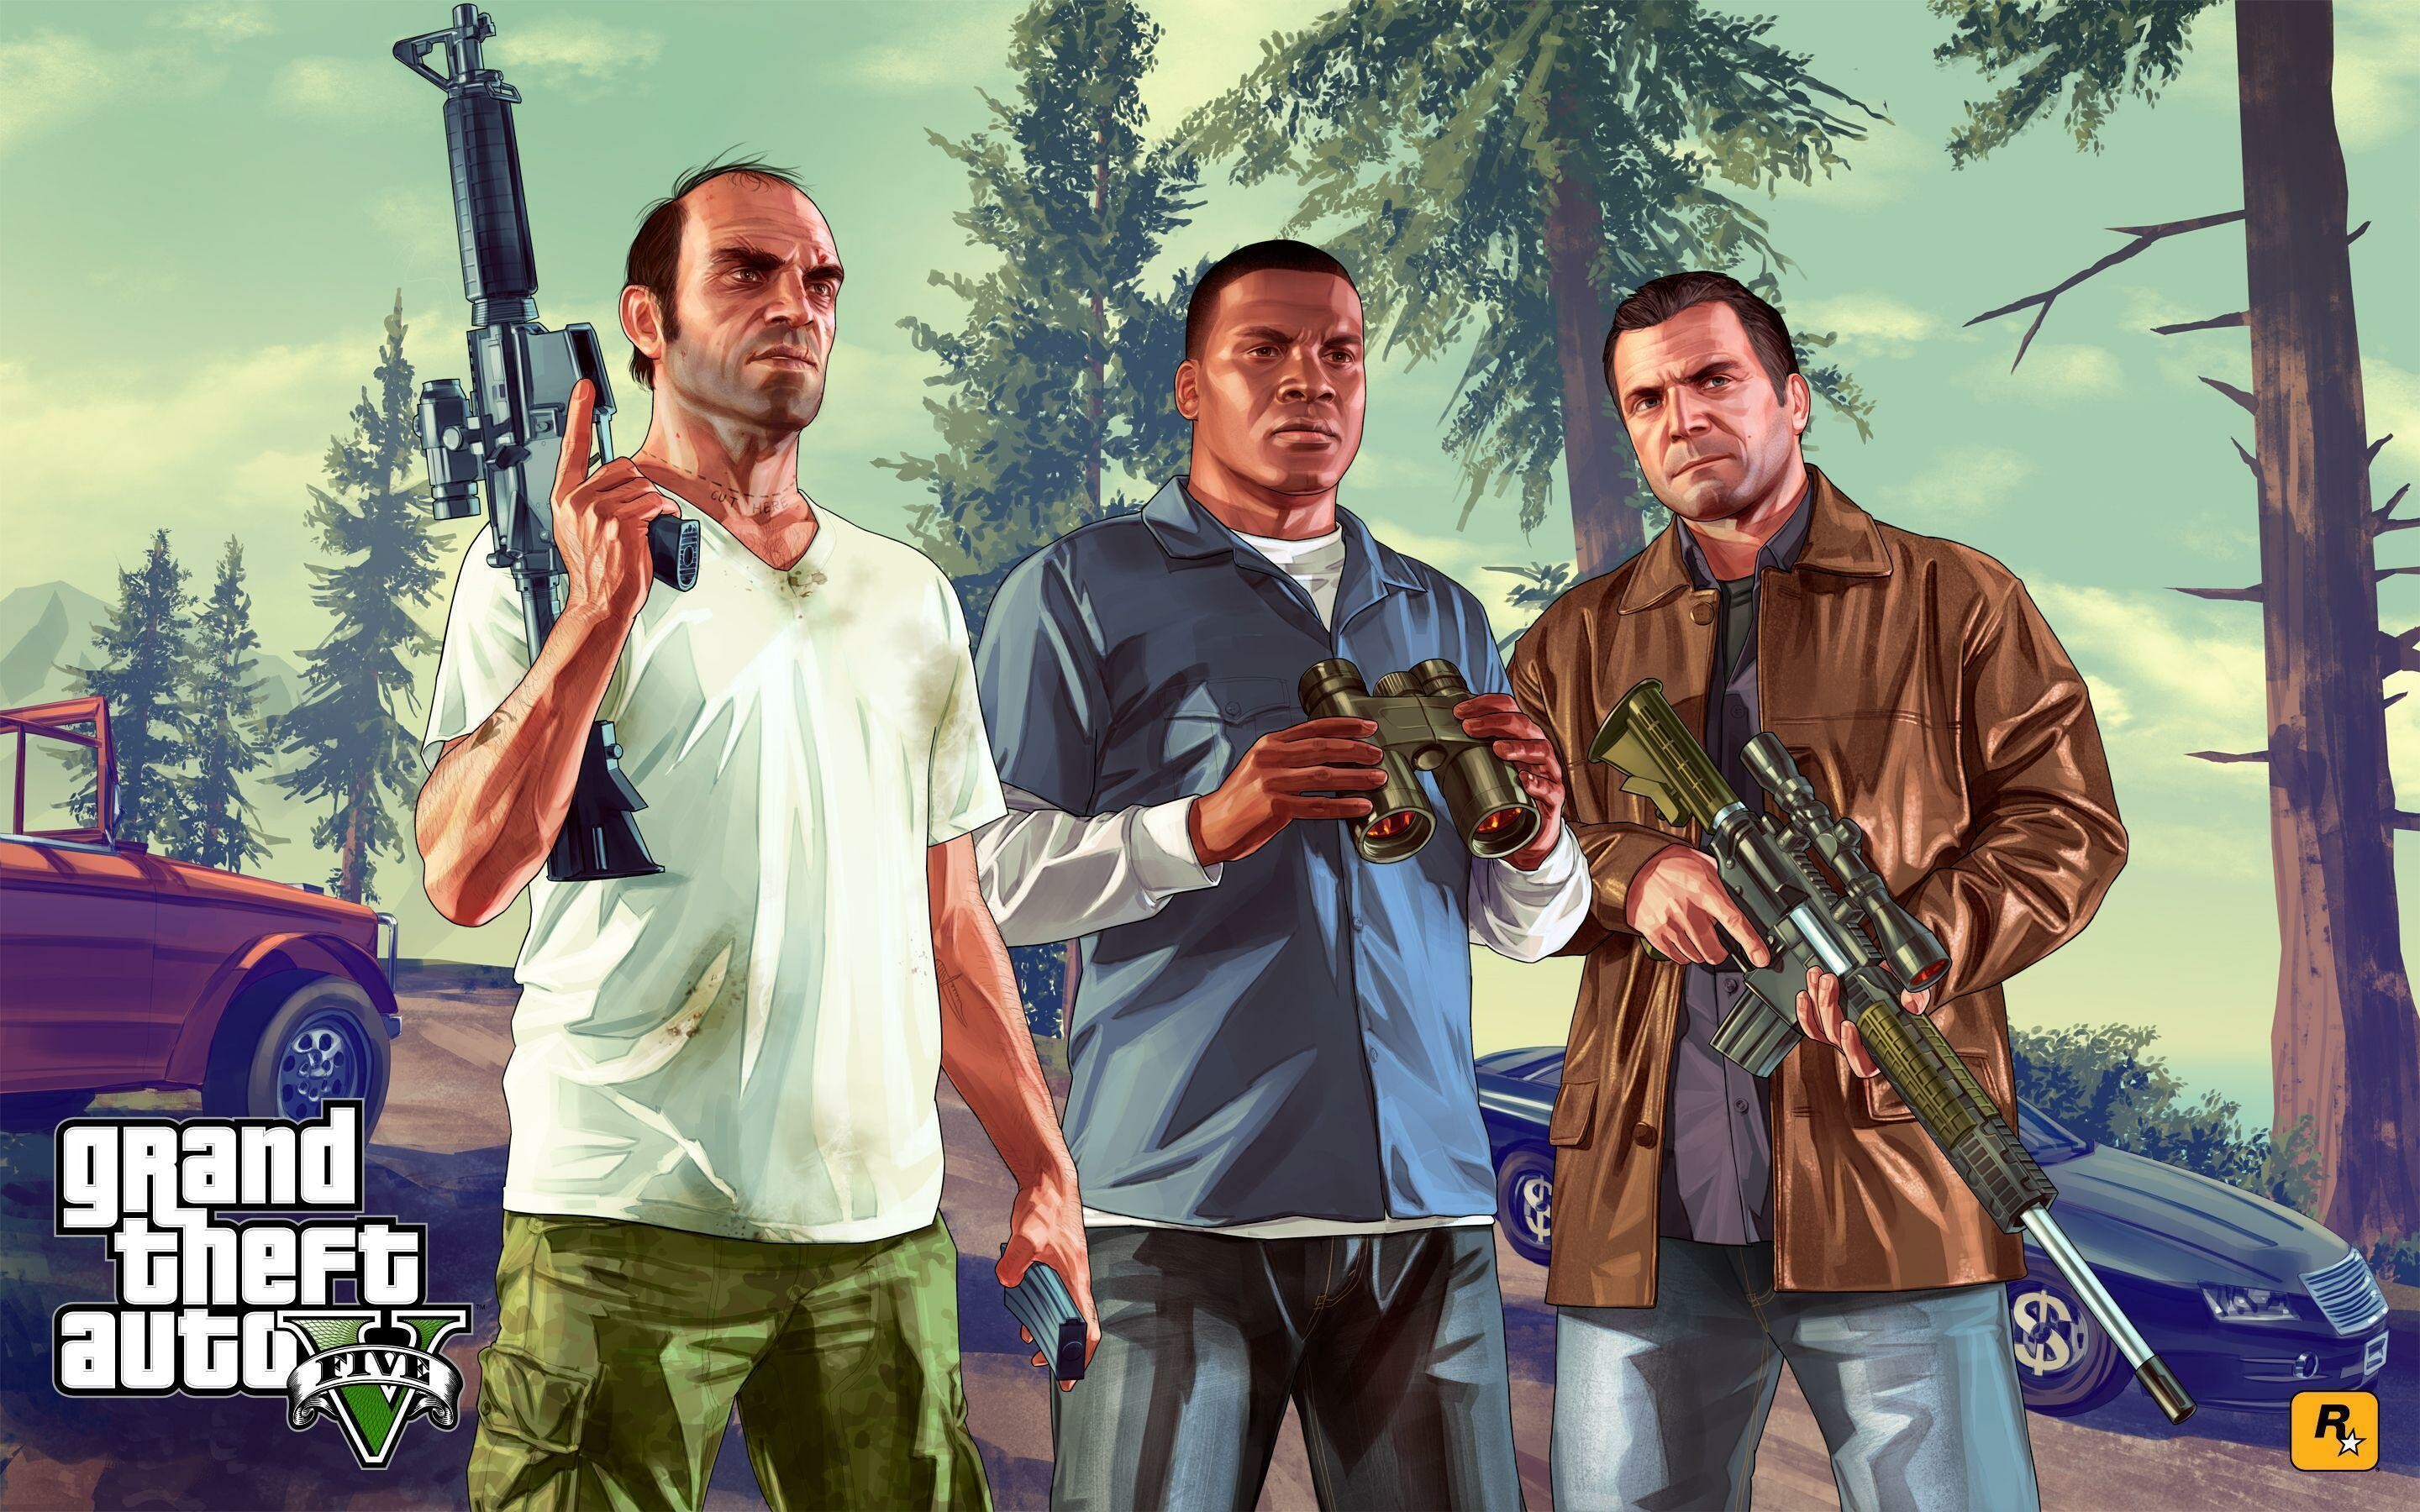 Grand Theft Auto 5: The open-world action game, players assume the role of three criminals. 2880x1800 HD Wallpaper.